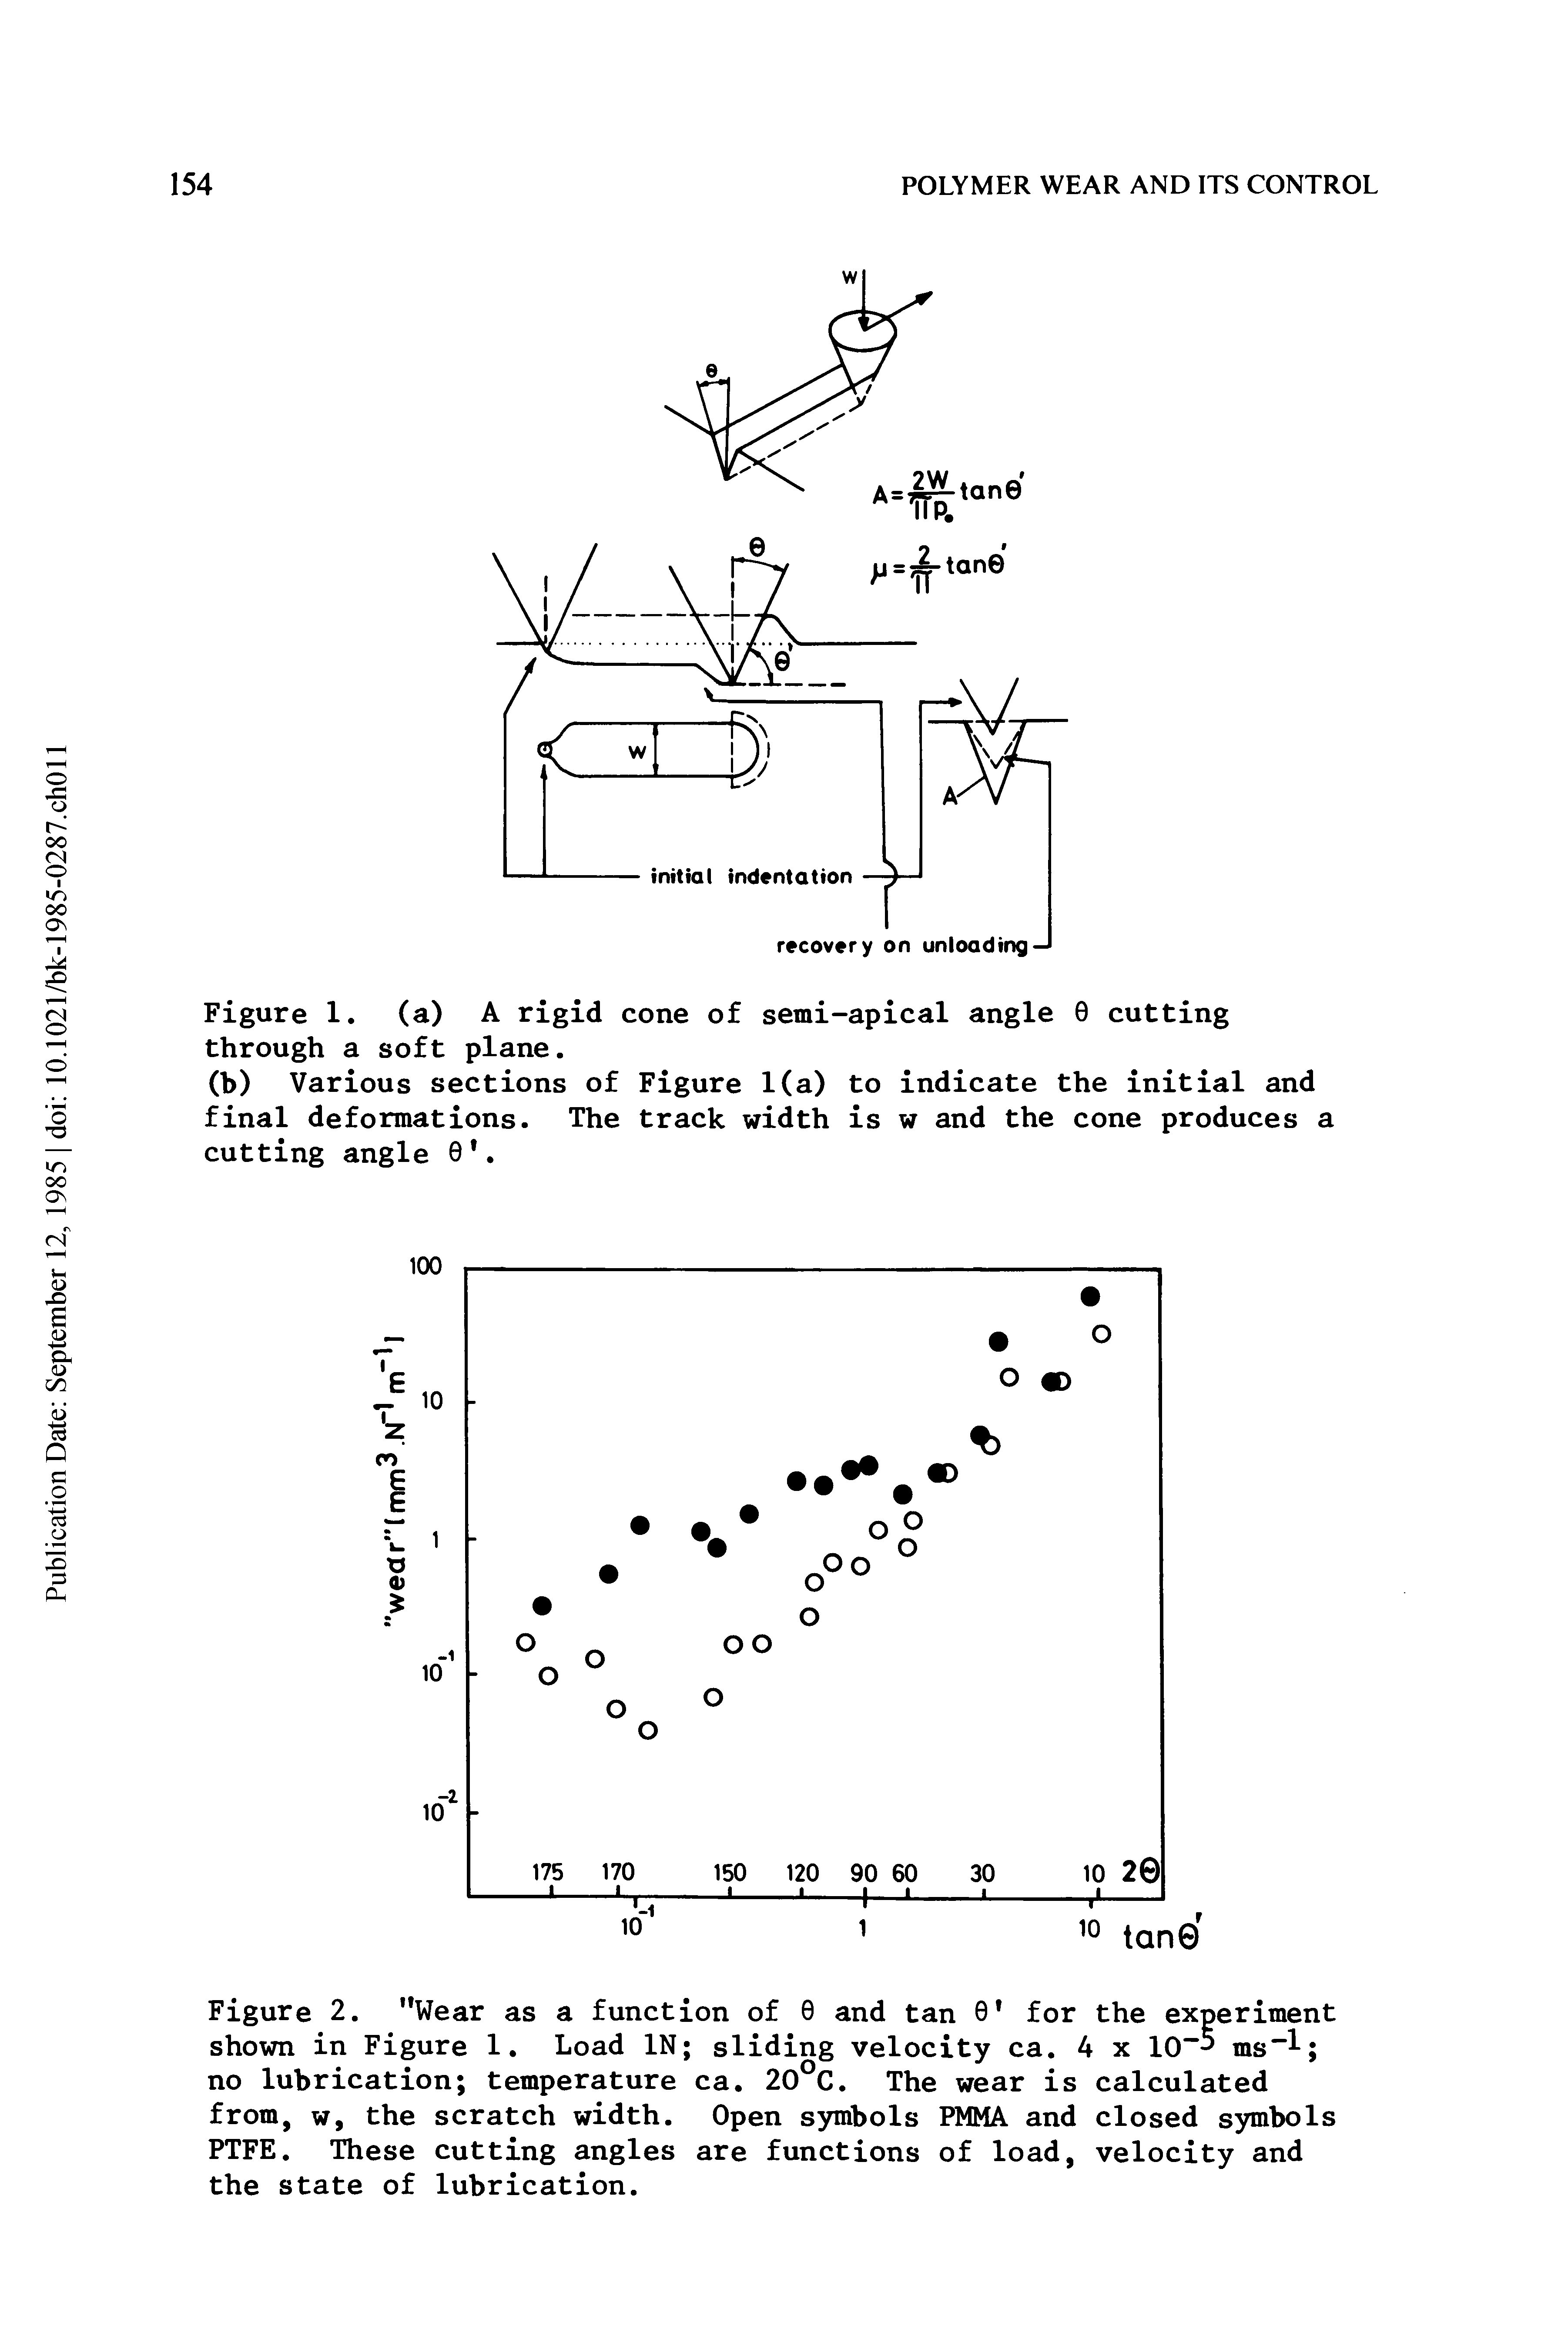 Figure 2. "Wear as a function of 0 and tan 0 for the experiment shown in Figure 1. Load IN sliding velocity ca. 4 x 10 5 ms l no lubrication temperature ca. 20°C. The wear is calculated from, w, the scratch width. Open symbols PMMA and closed symbols PTFE. These cutting angles are functions of load, velocity and the state of lubrication.